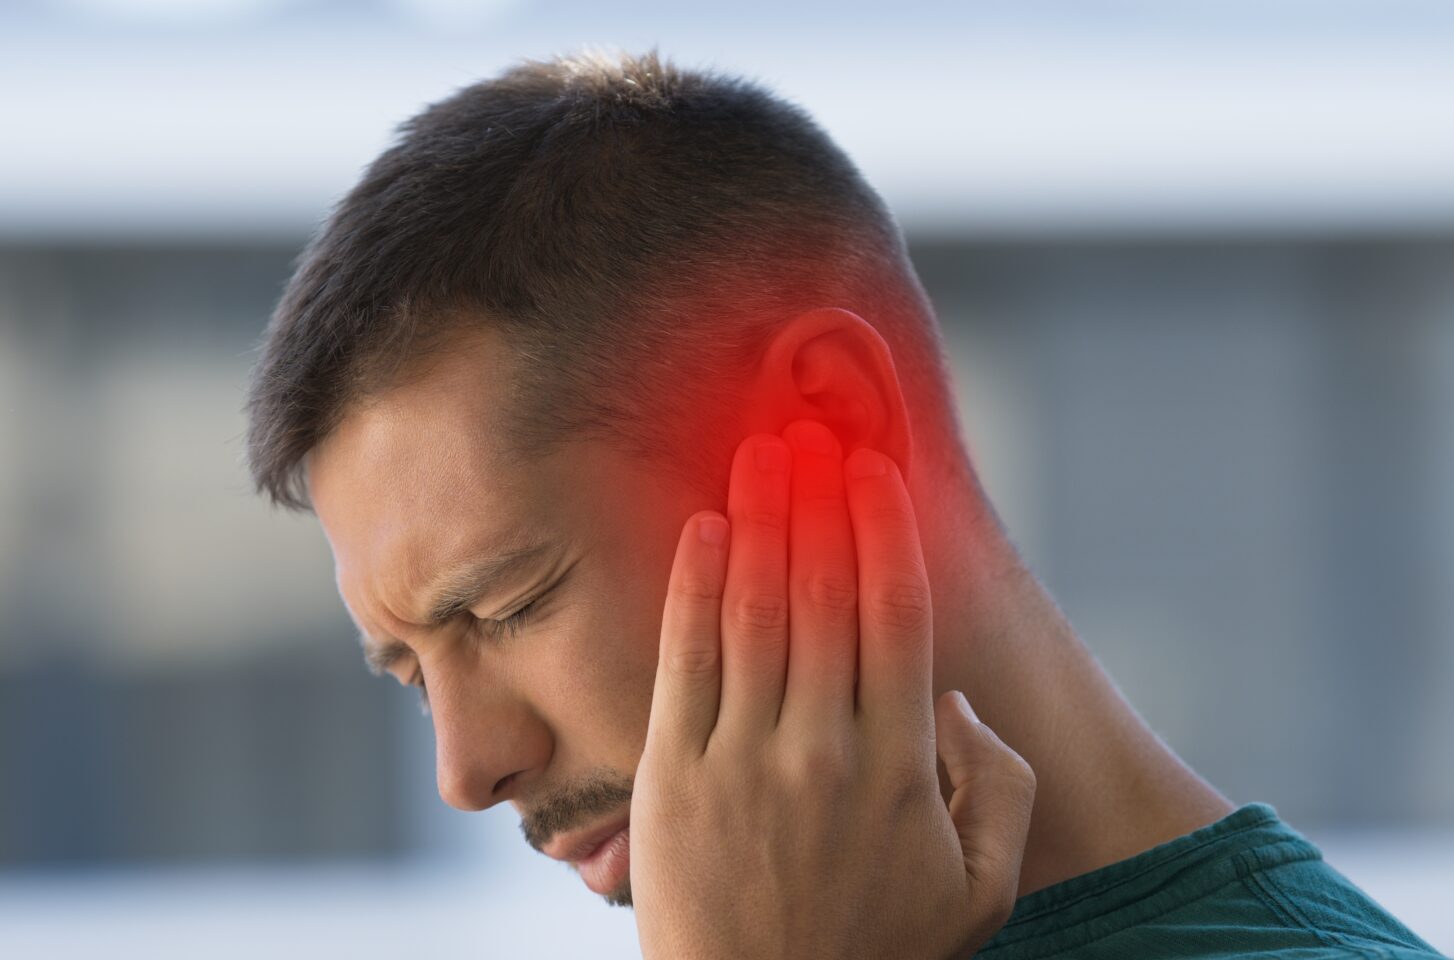 Patients Turn to Cannabis for Tinnitus Relief, Study Finds